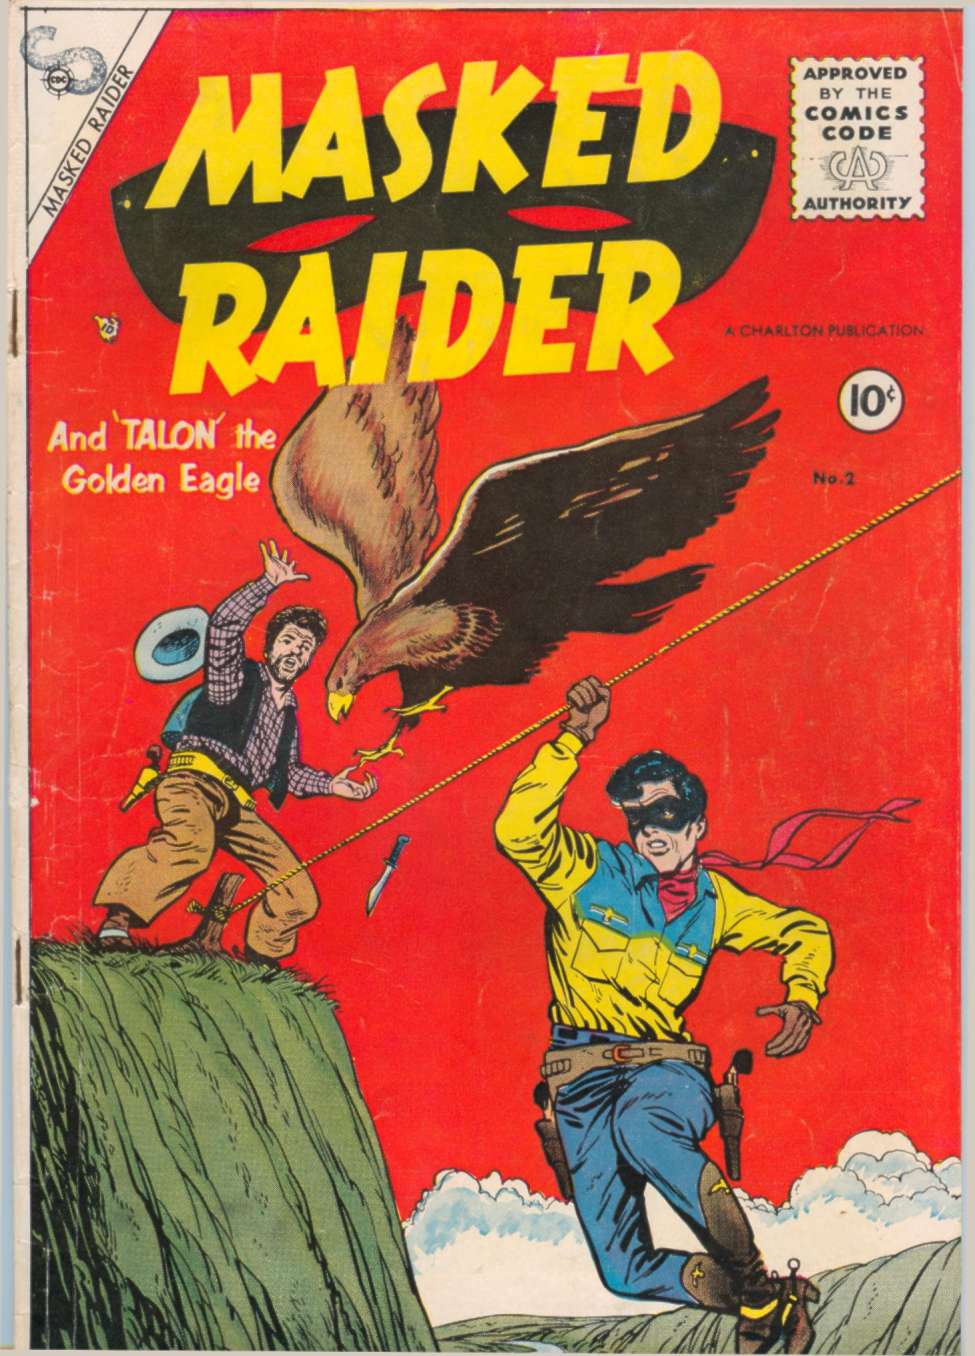 Book Cover For Masked Raider 2 - Version 1